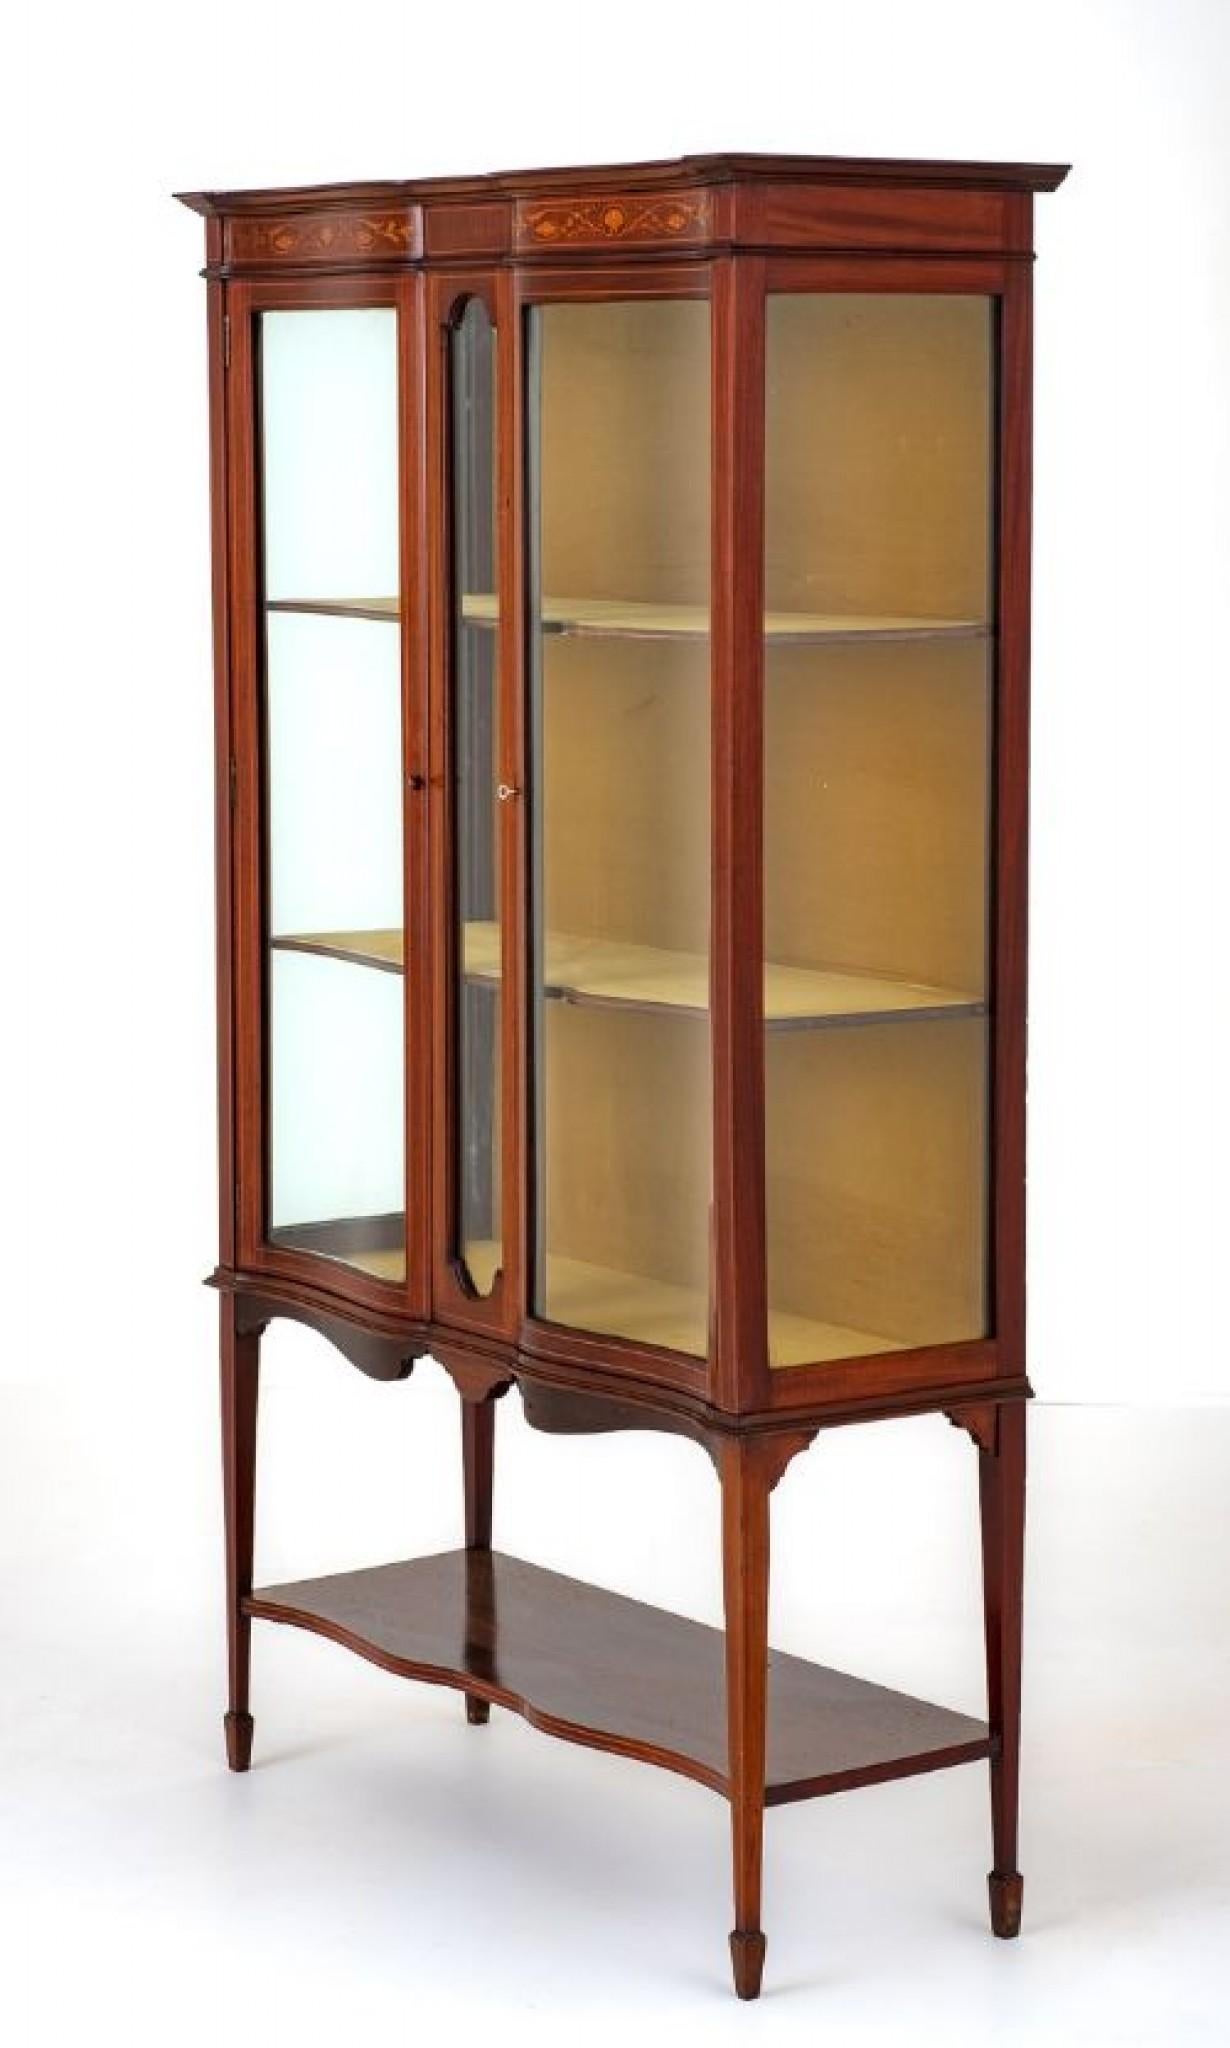 Sheraton Revival Mahogany Inlaid Display Cabinet.
Circa 1890
This Cabinet Stands Upon Square Tapered Legs with Spade feet and Has a Shaped Undertray.
The Cabinet Features 2 Shaped Glazed Doors with a Central Glazed Glass Panel.
The Top Frieze